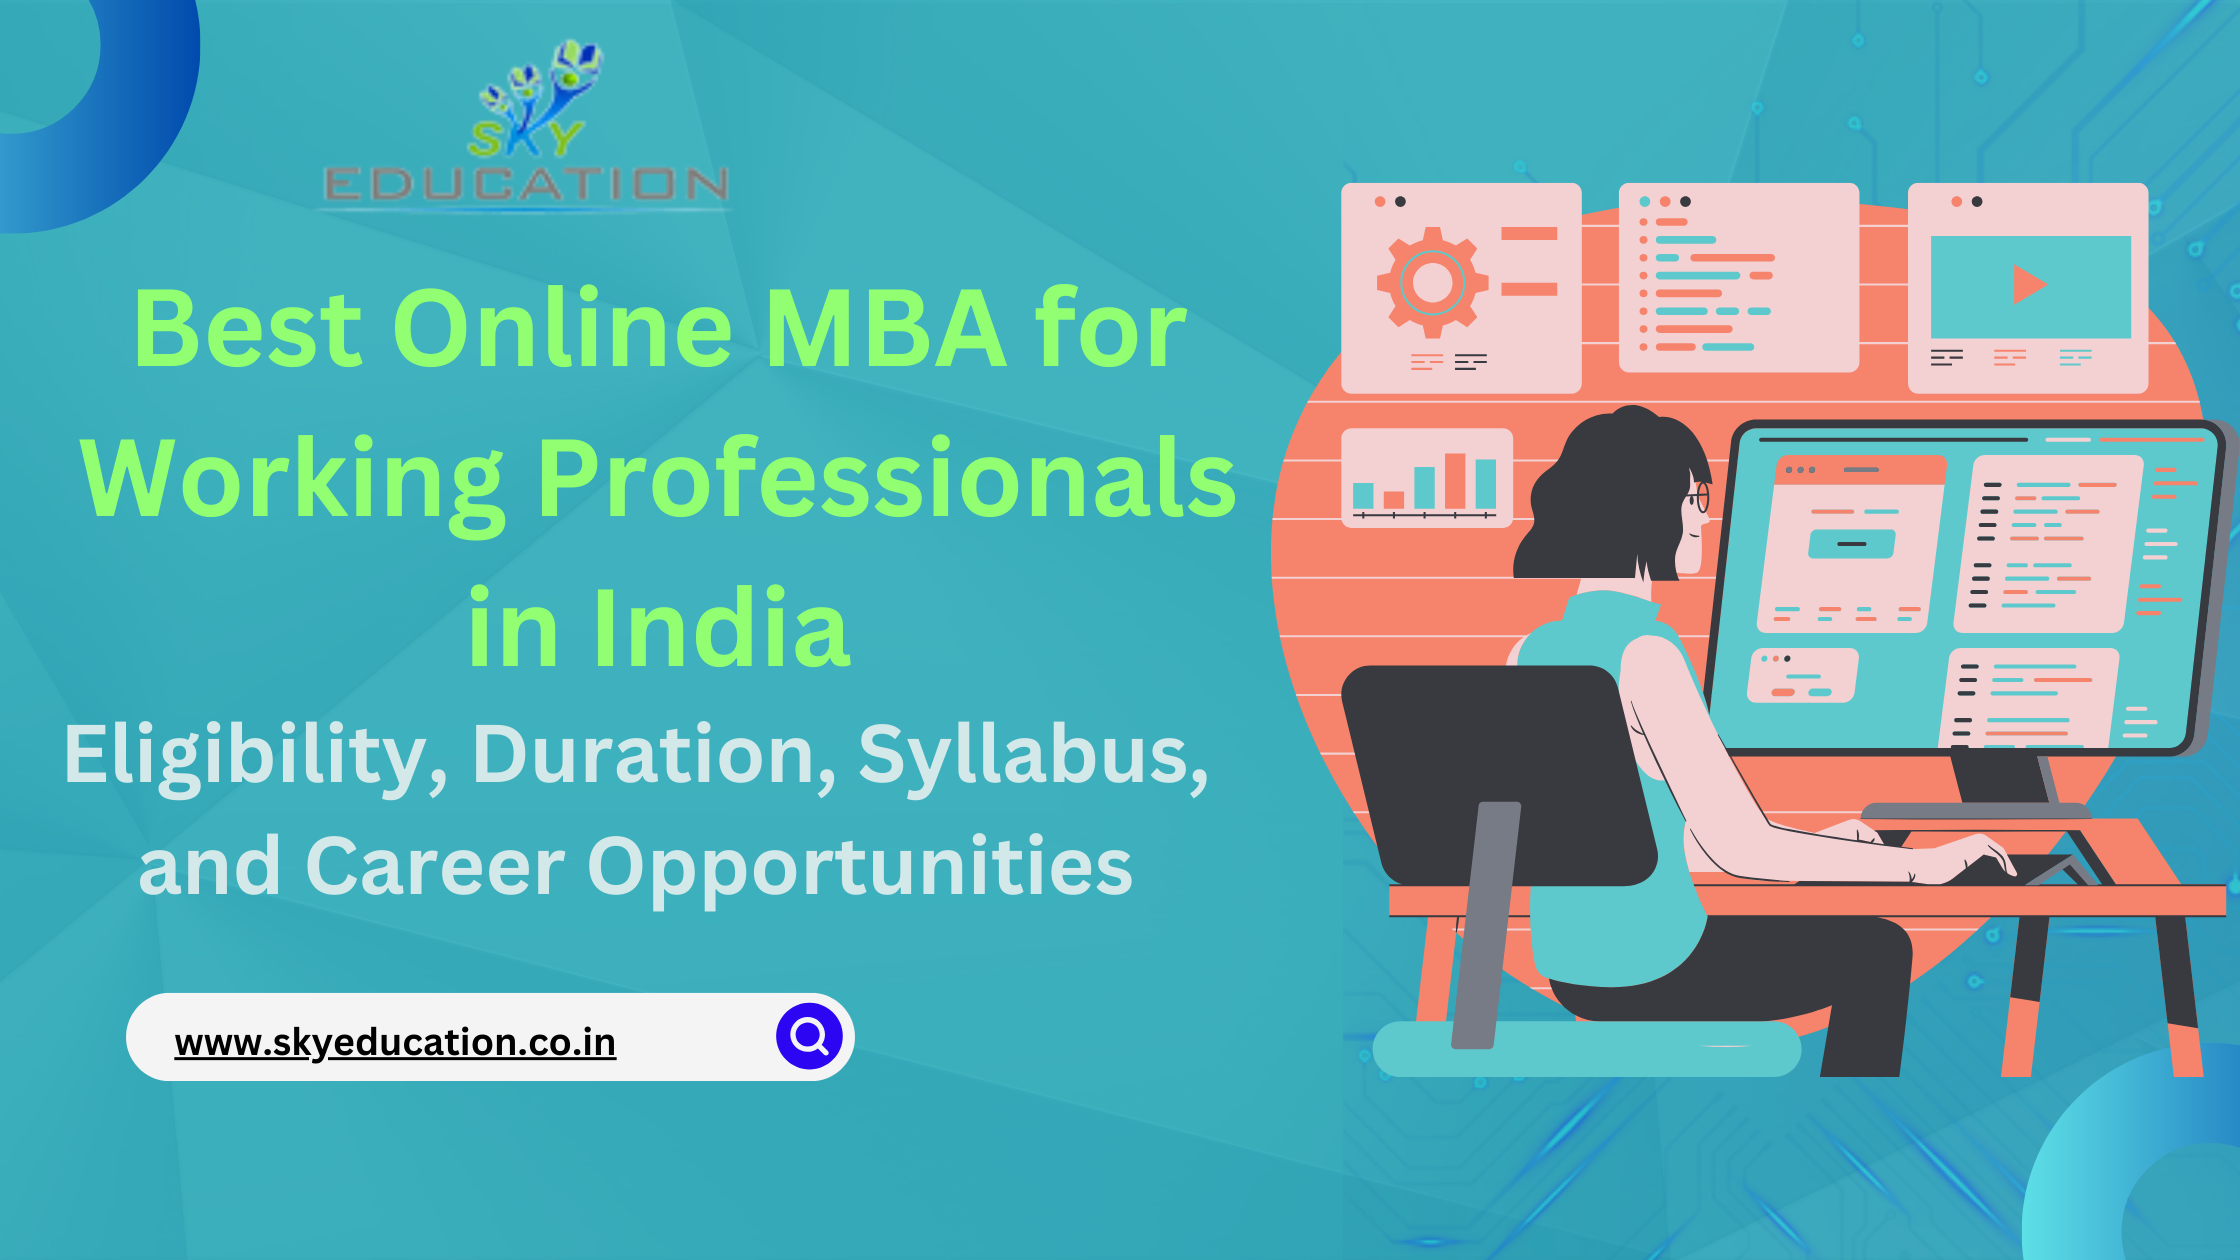 Choosing the Best Online MBA for Working Professionals in India 'photo